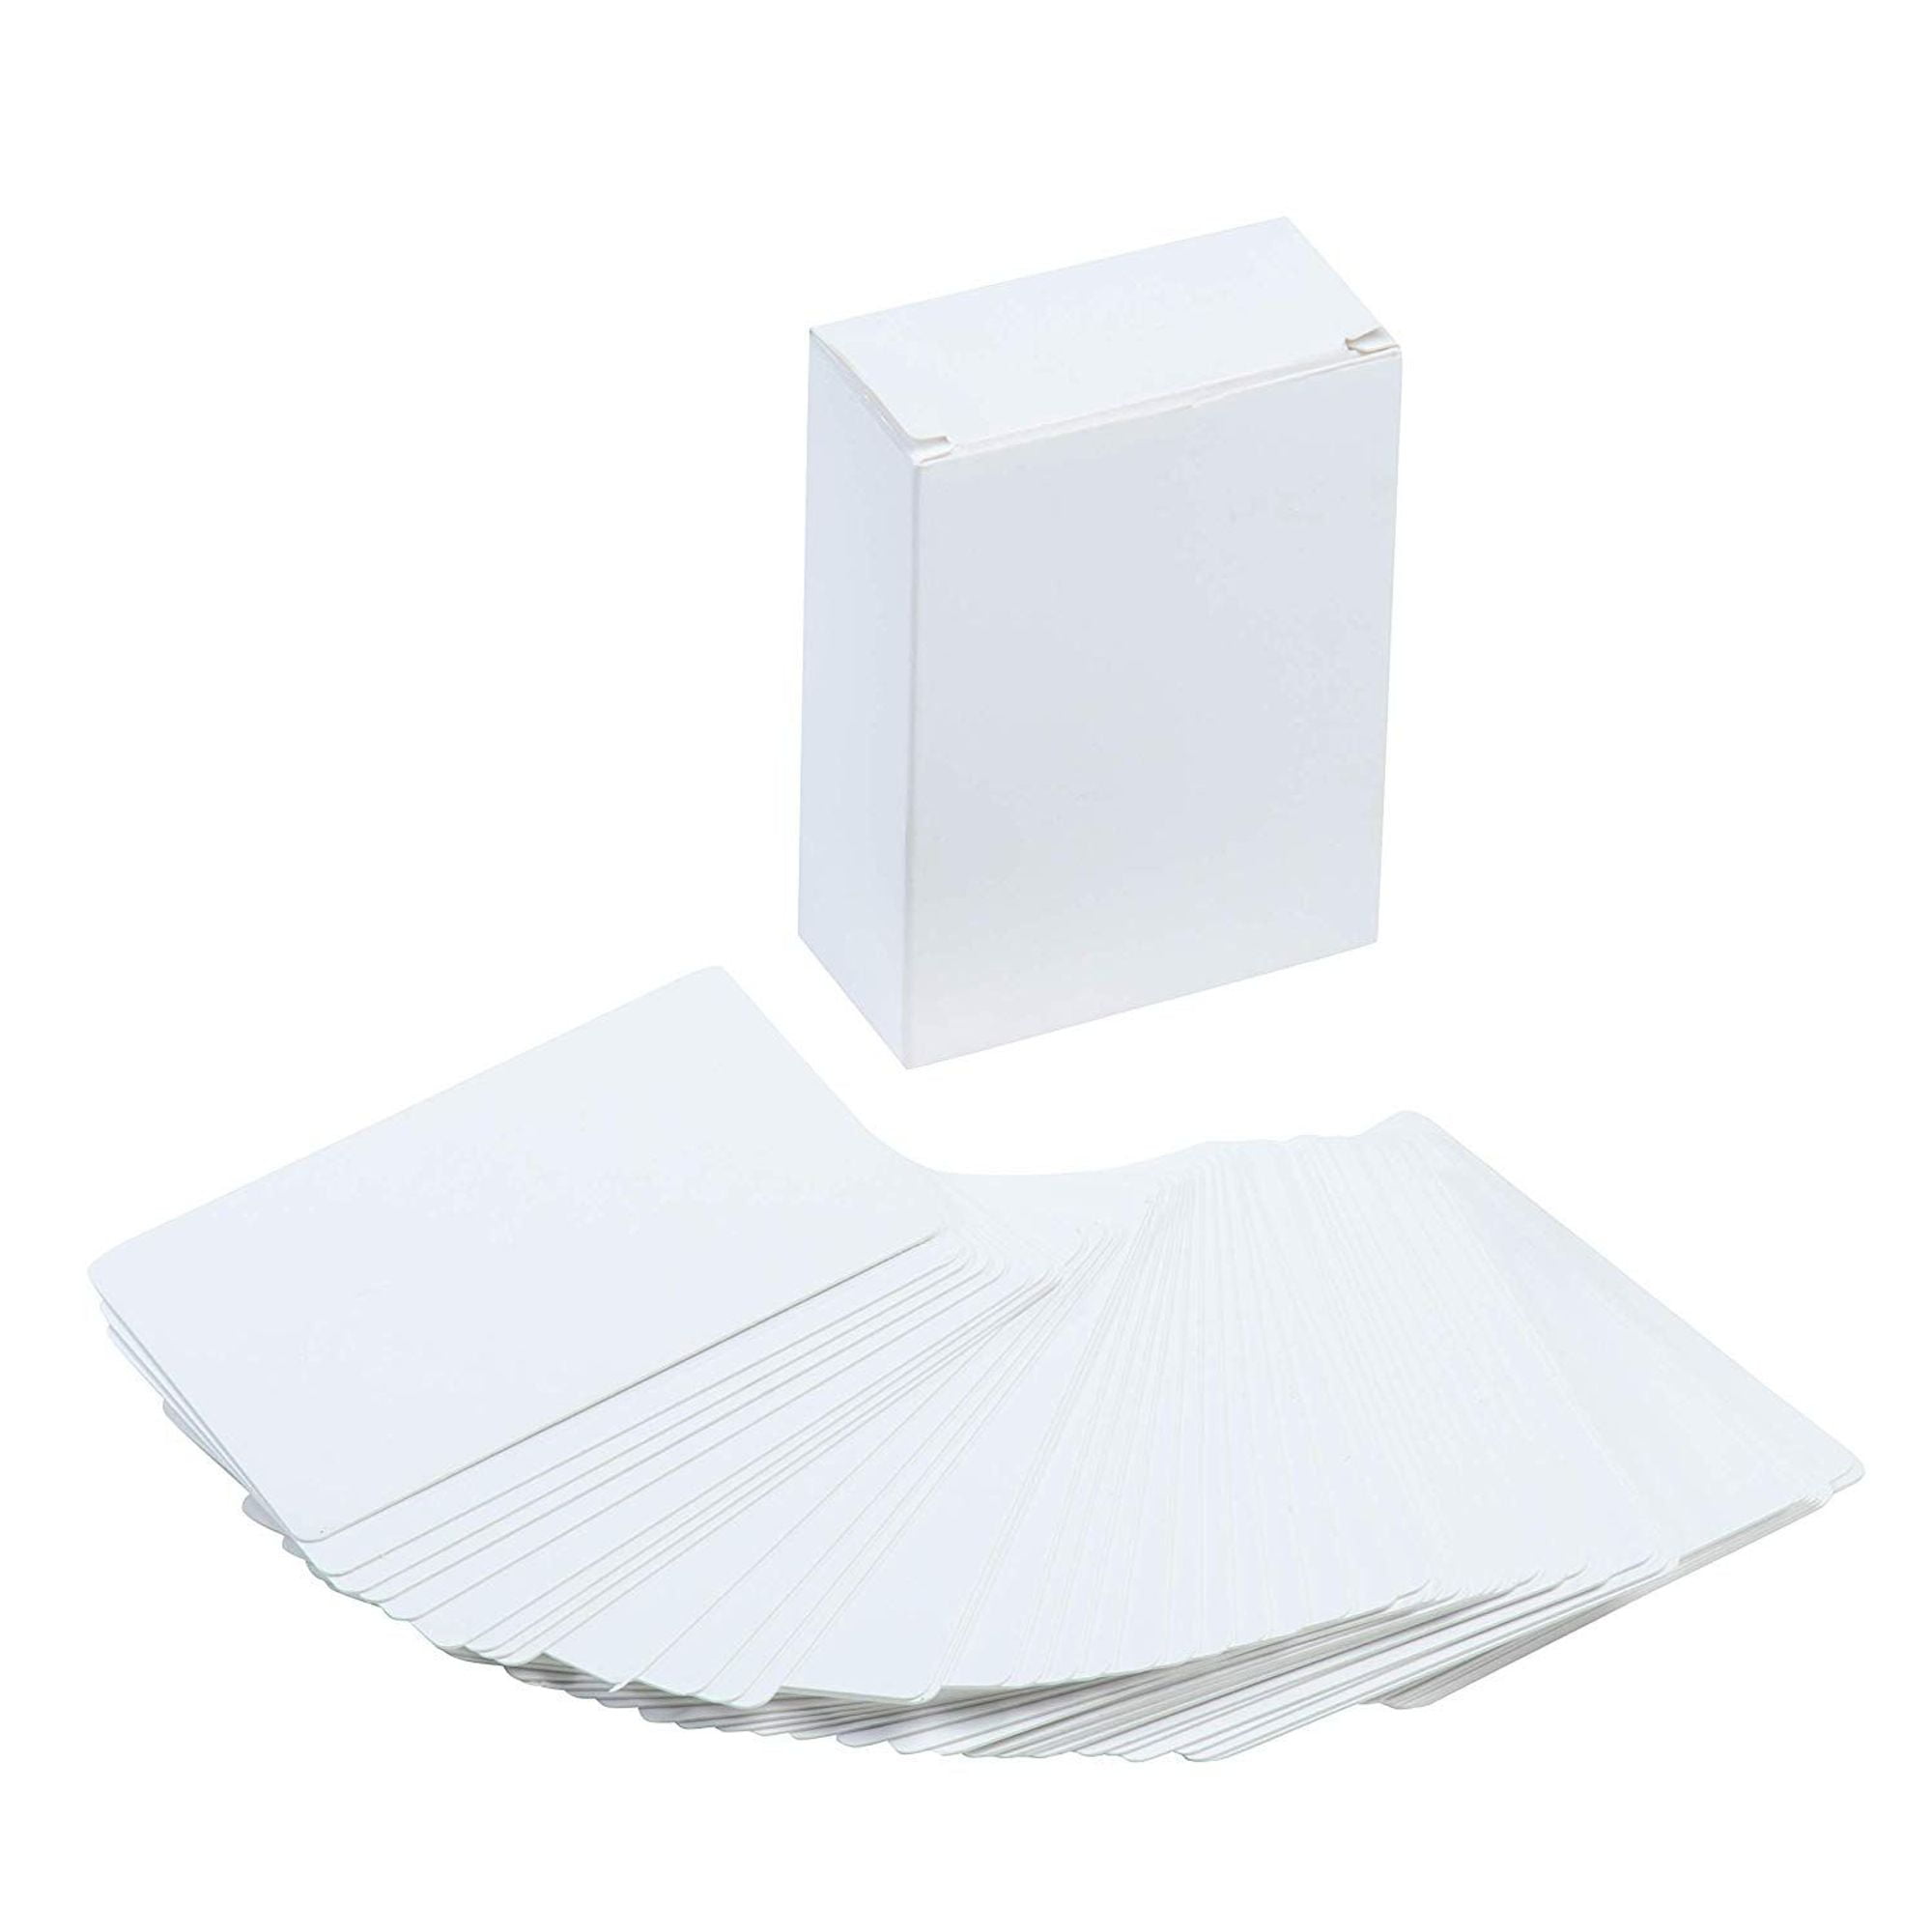 Blank Index Card 216 Piece White Cardstock Flash Cards Note Cards Perfect For Diy Game Card Study School Language Learning Memory Game 4 Gsm 2 5 X 3 5 Inches Walmart Com Walmart Com